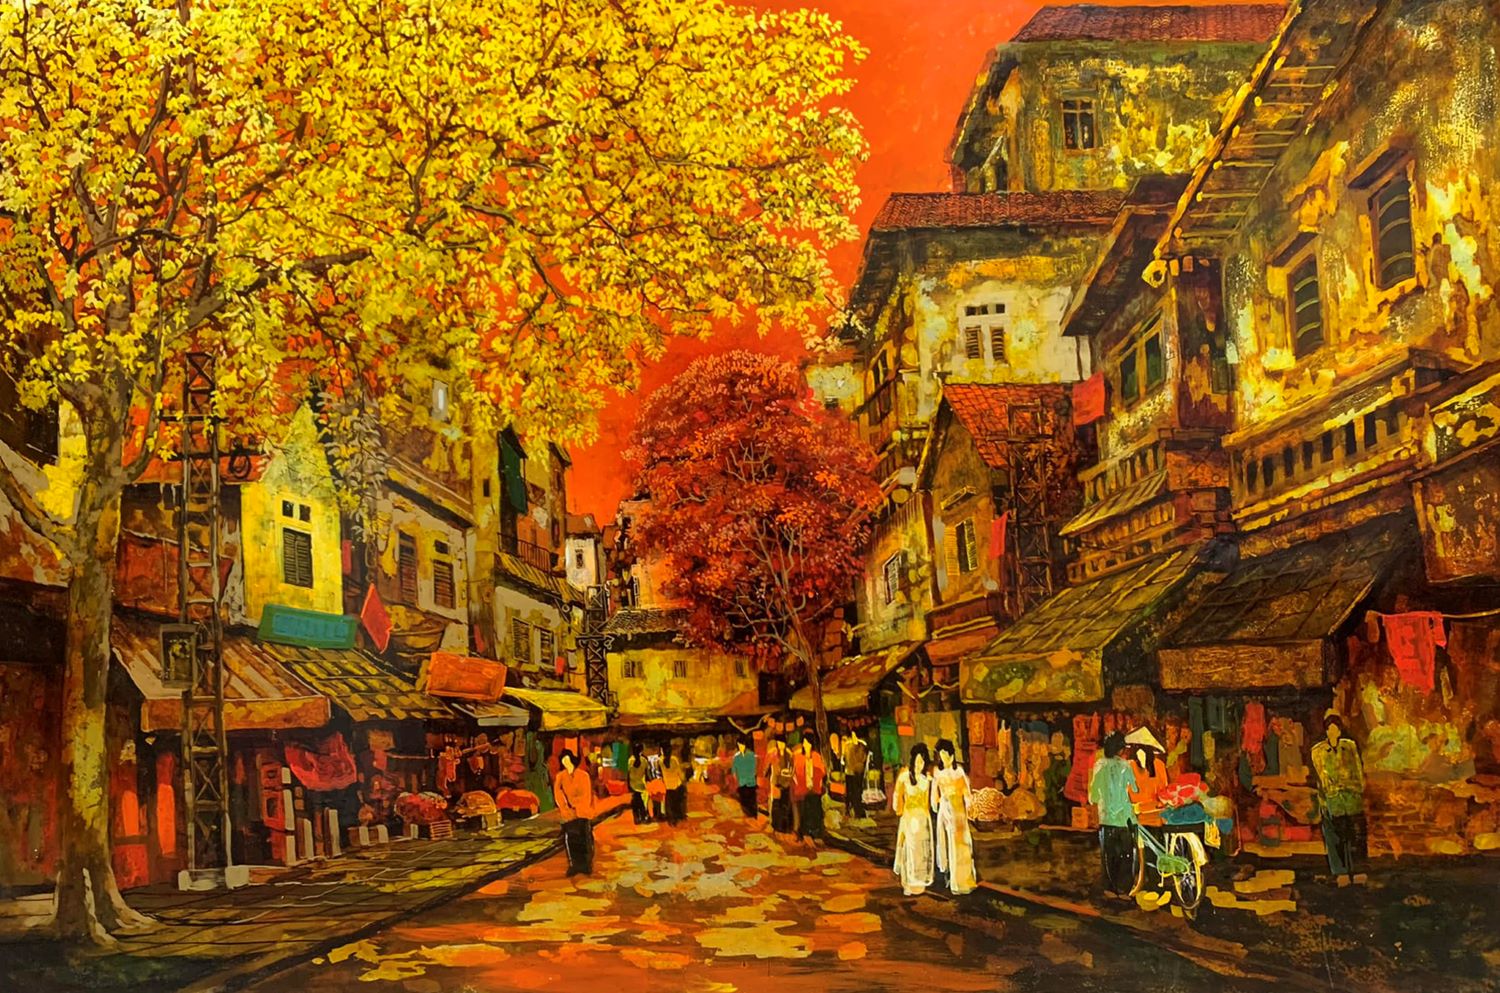 Spring Covers Street I - Vietnamese Lacquer Painting by Artist Giap Van Tuan